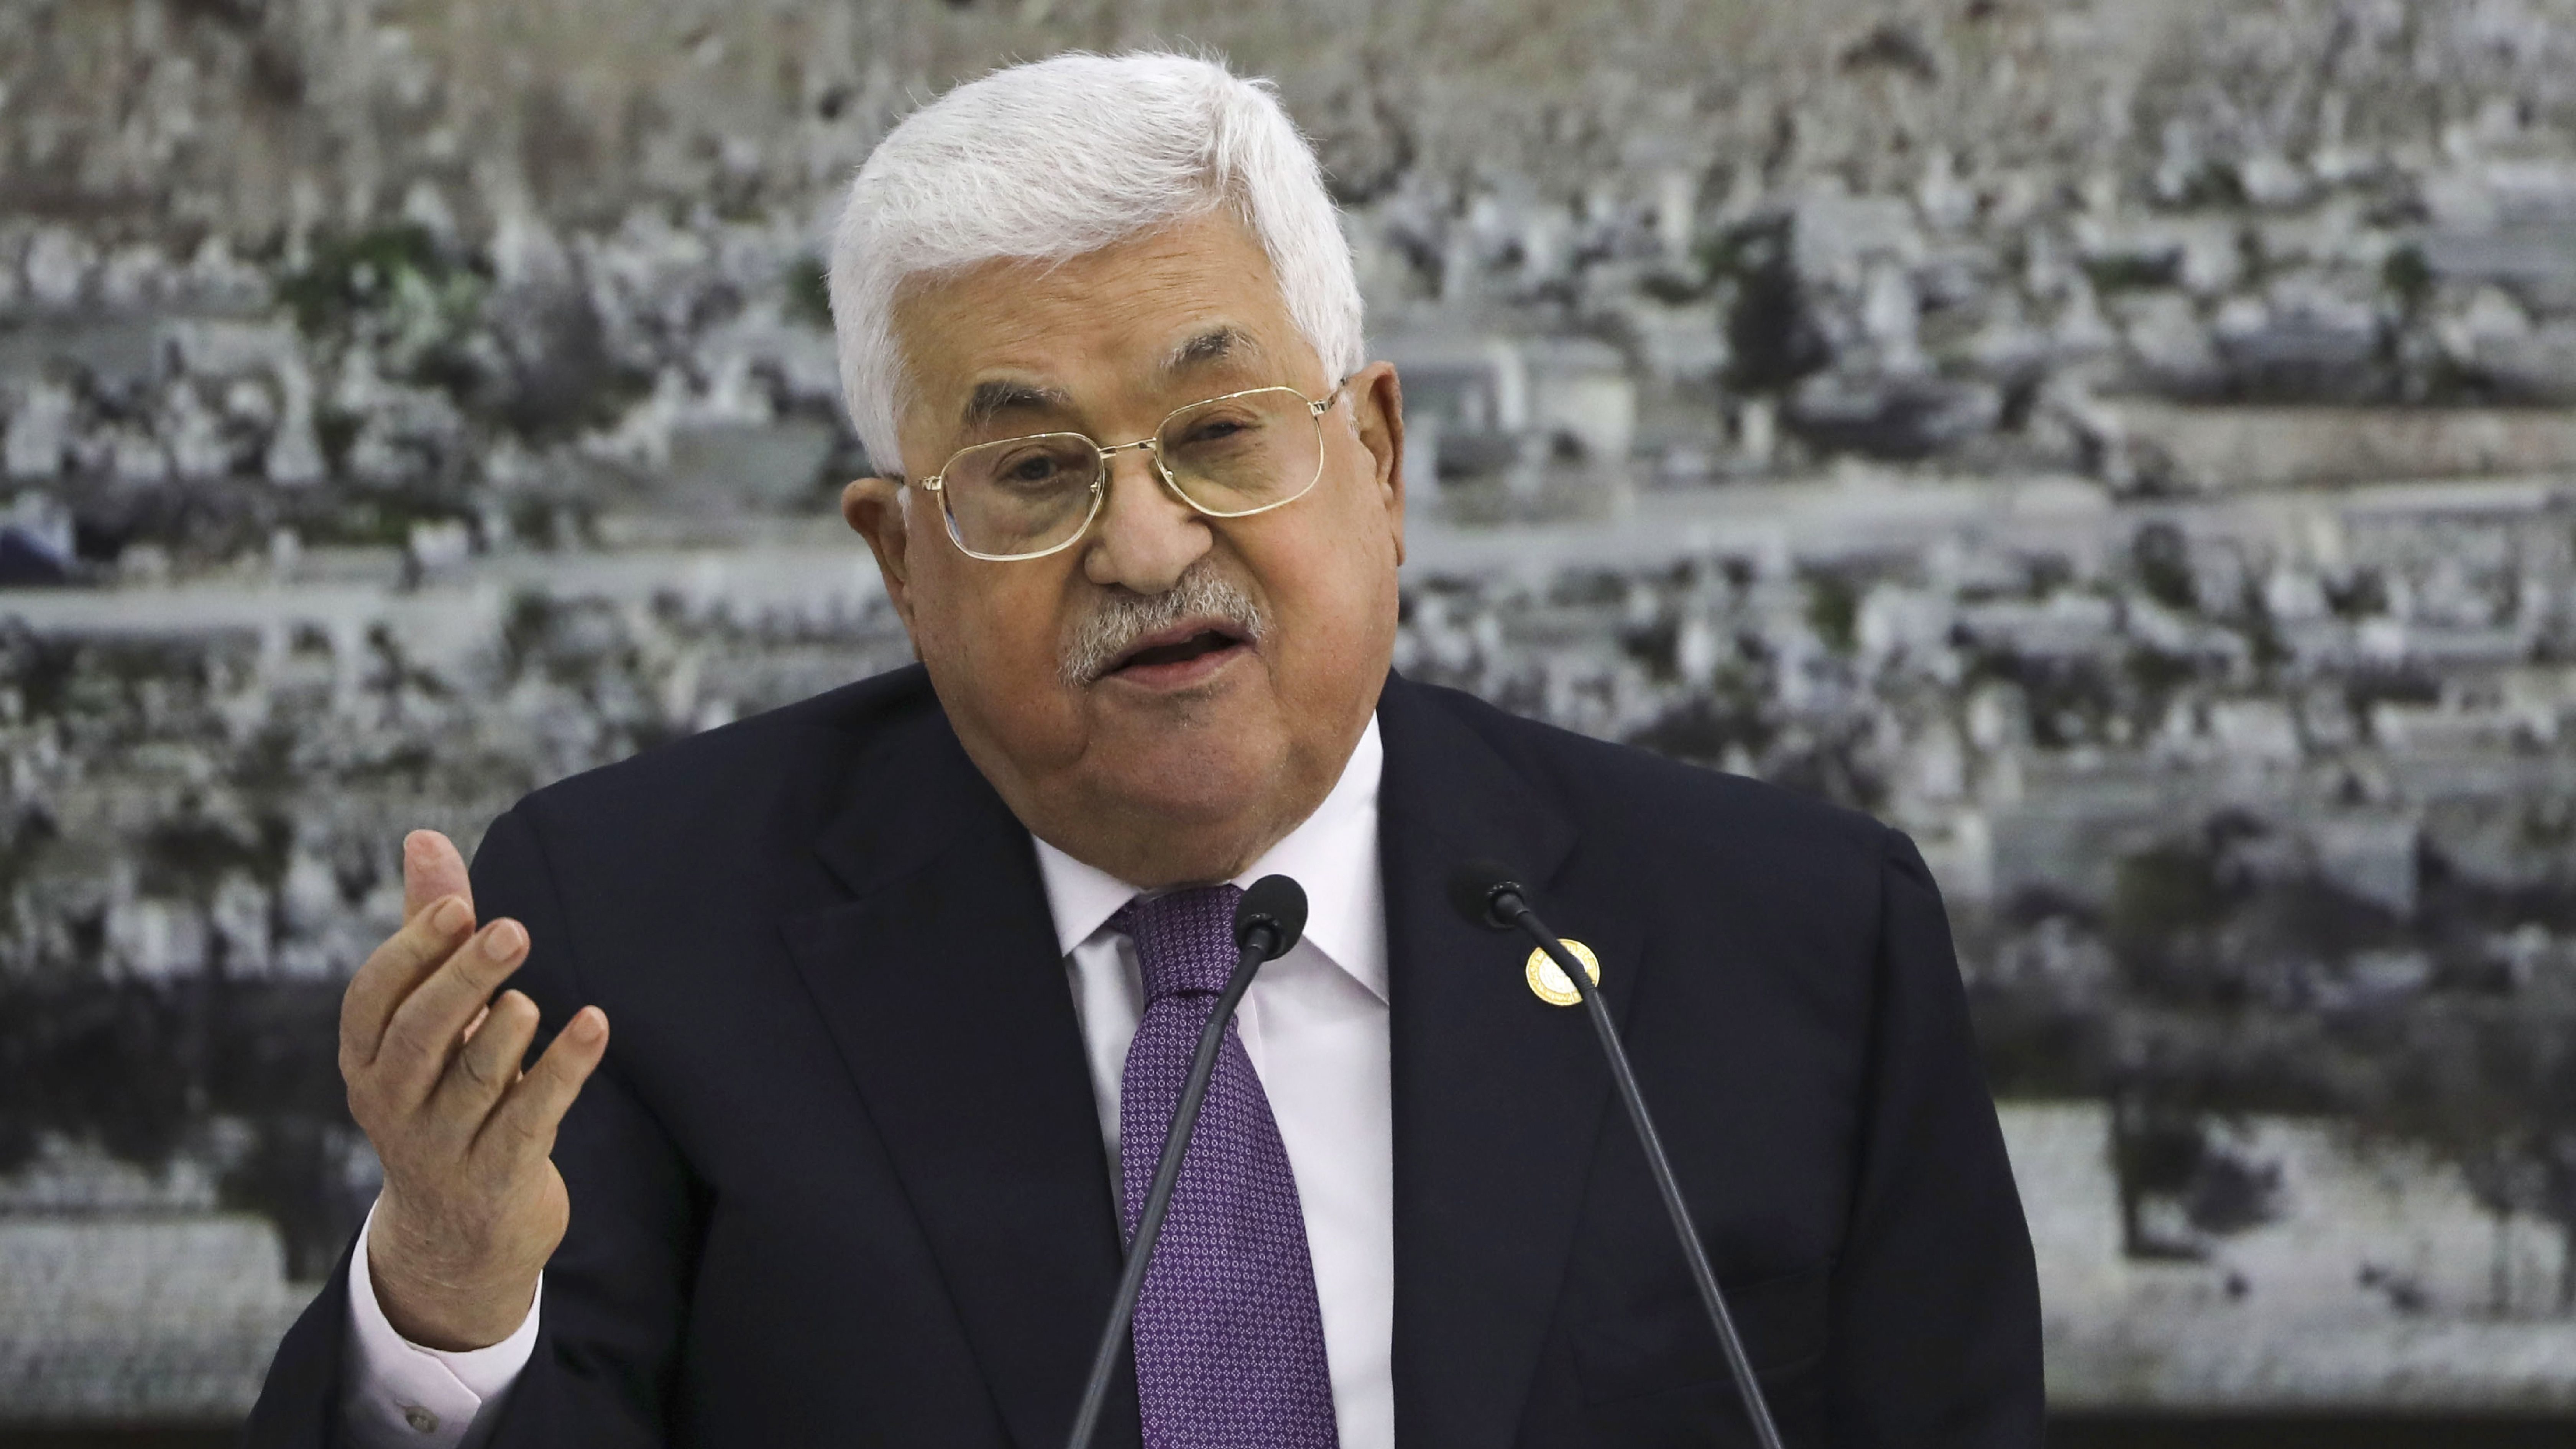 Abbas: We Will Go to Elections after All Factions Have Agreed